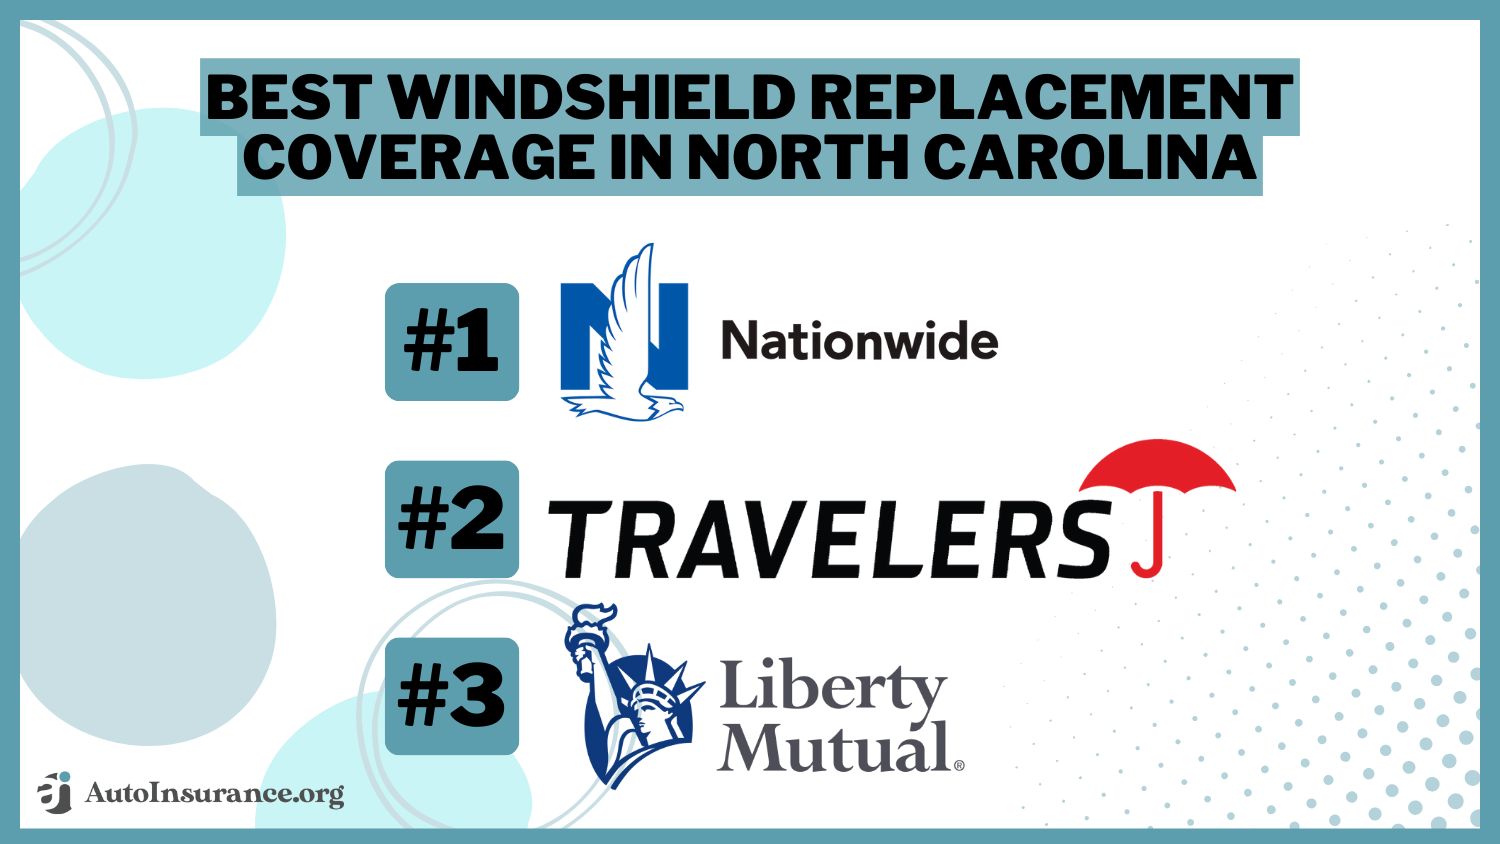 Best Windshield Replacement Coverage in North Carolina: Nationwide, Travelers, and Liberty Mutual